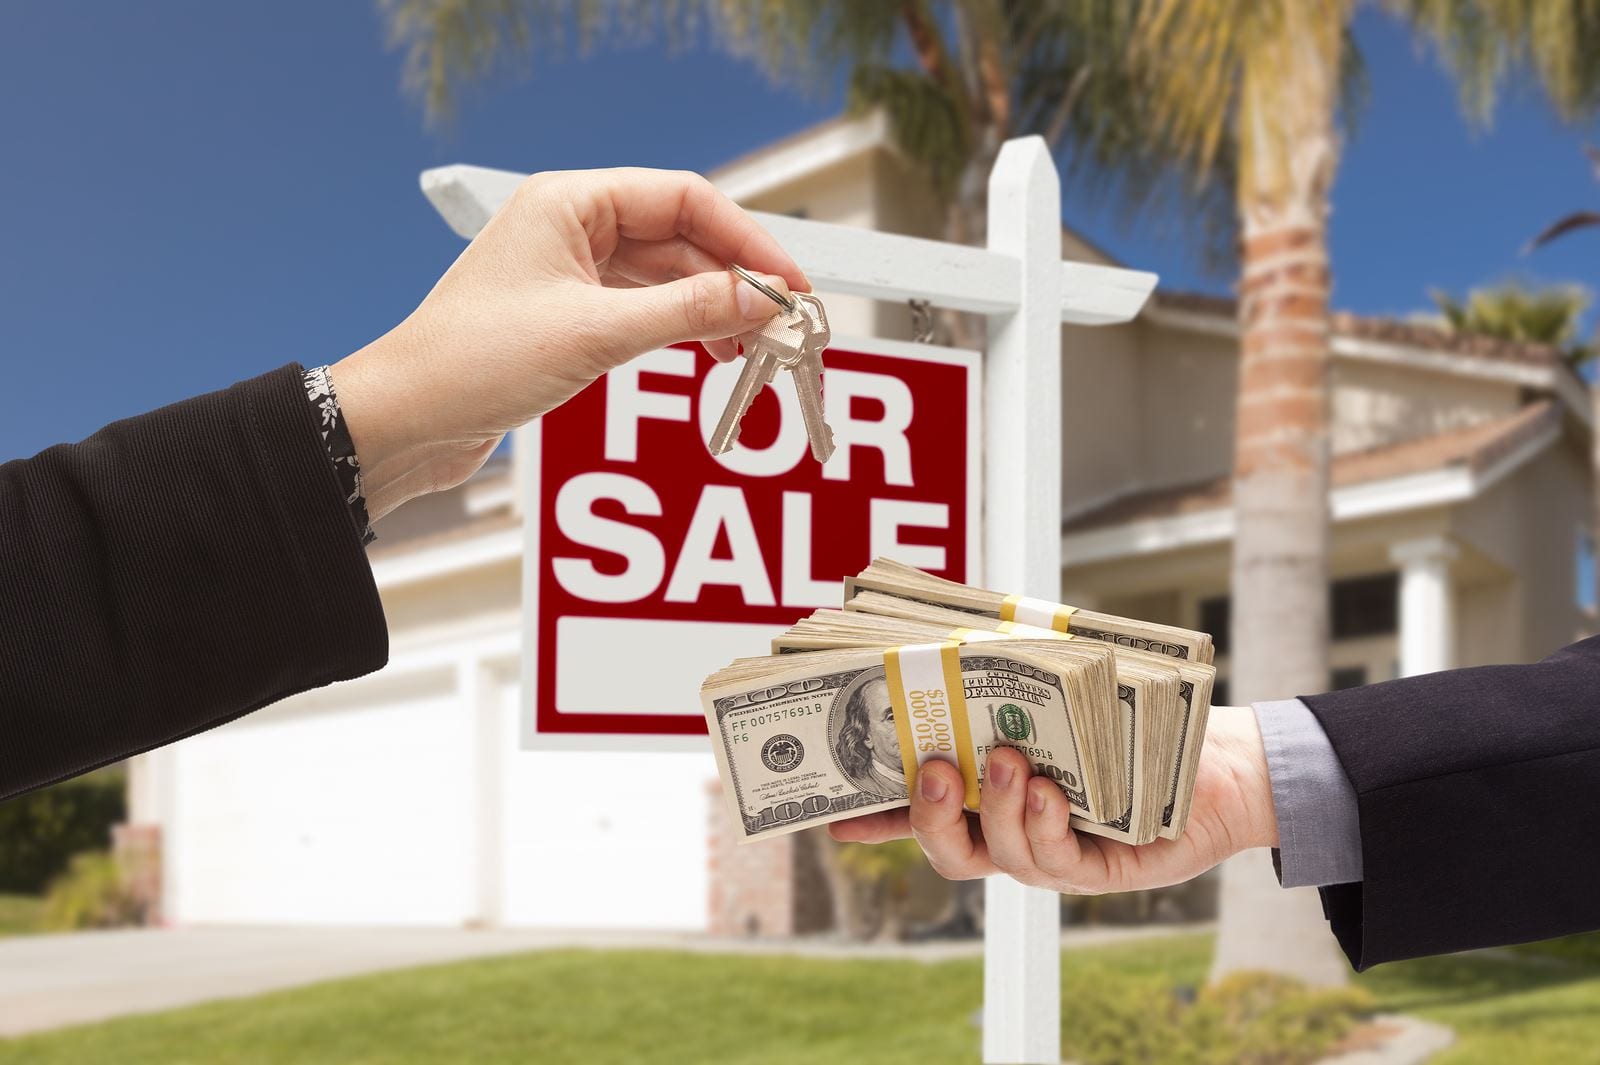 Sell My House Fast for Cash: 5 Great Reasons to Take the Offer